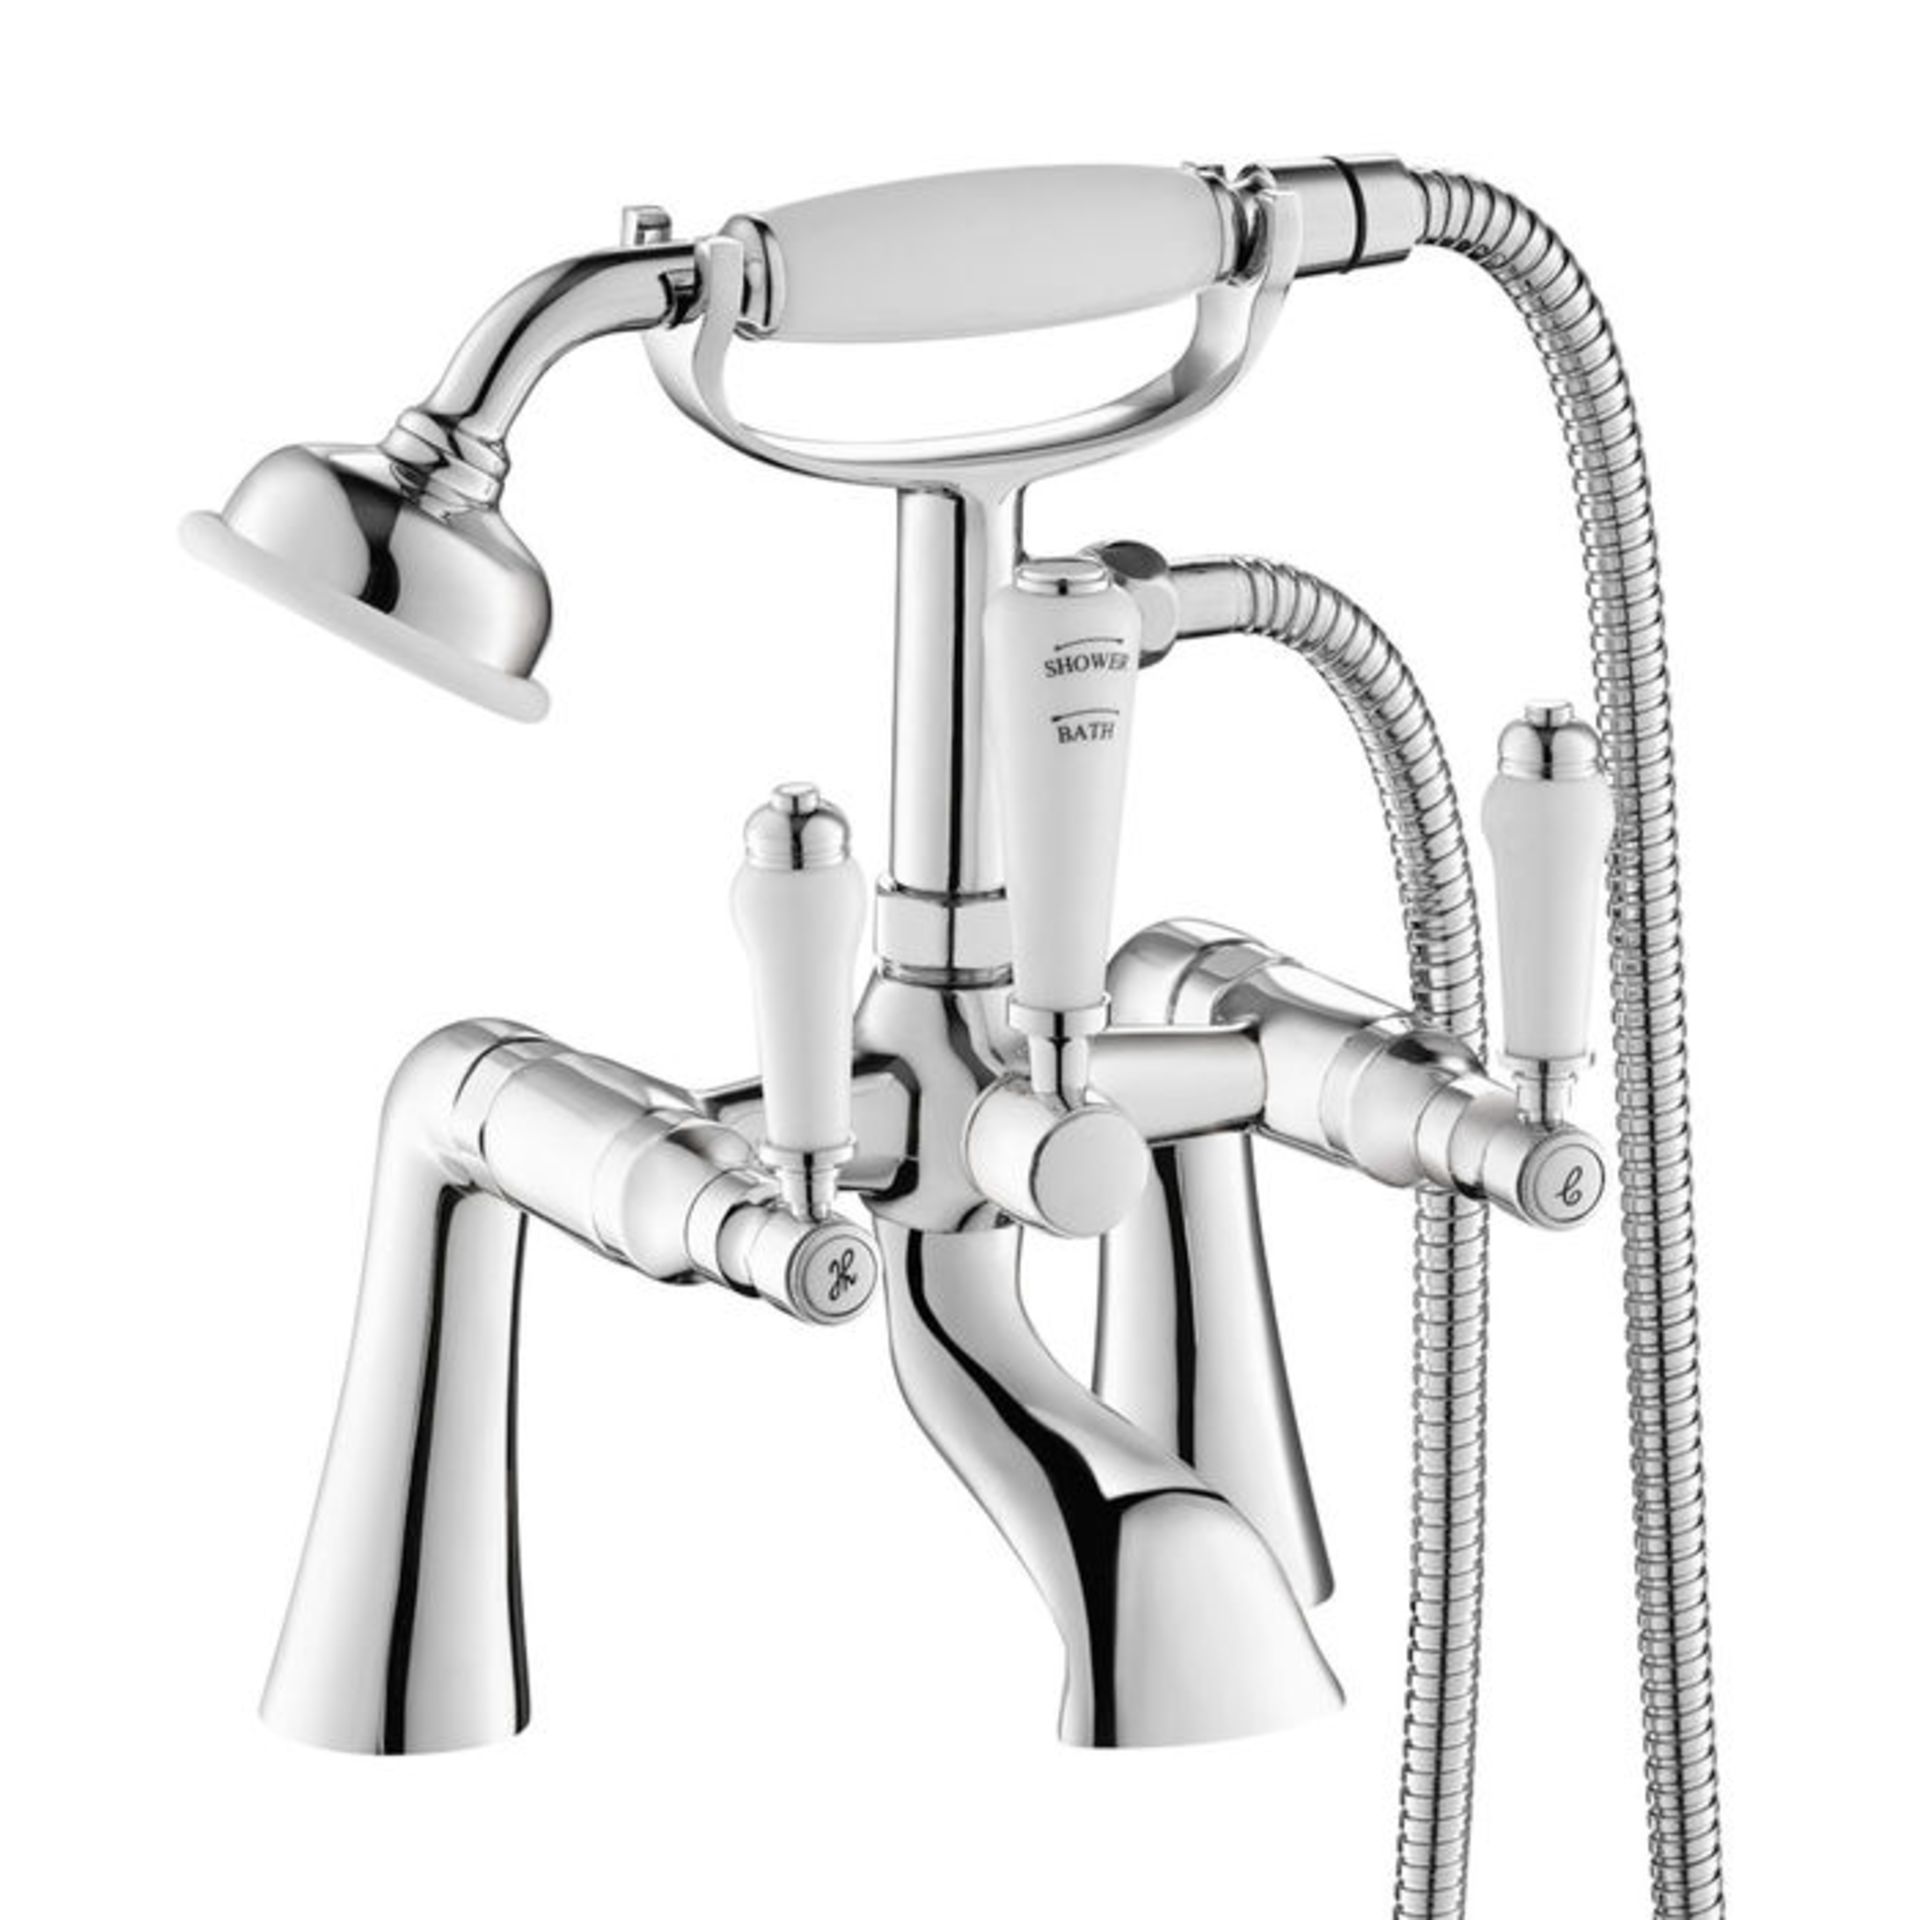 (AL29) Regal Chrome Traditional Bath Mixer Lever Tap with Hand Held Shower. Chrome Plated Solid - Image 2 of 4